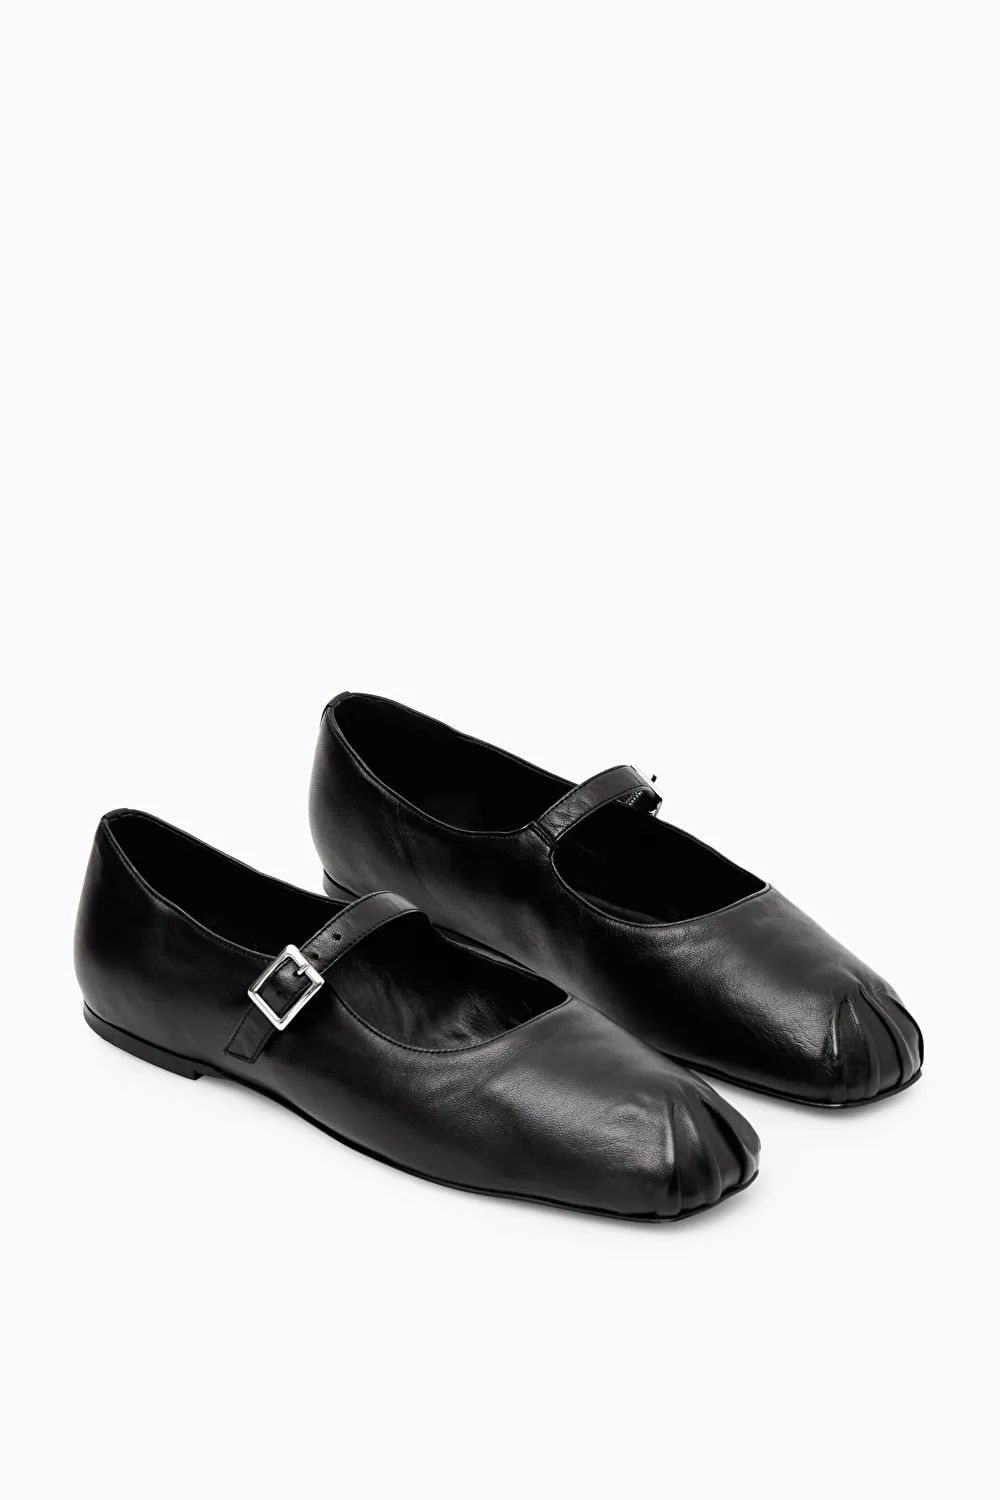 PLEATED LEATHER MARY-JANE BALLET FLATS | COS UK